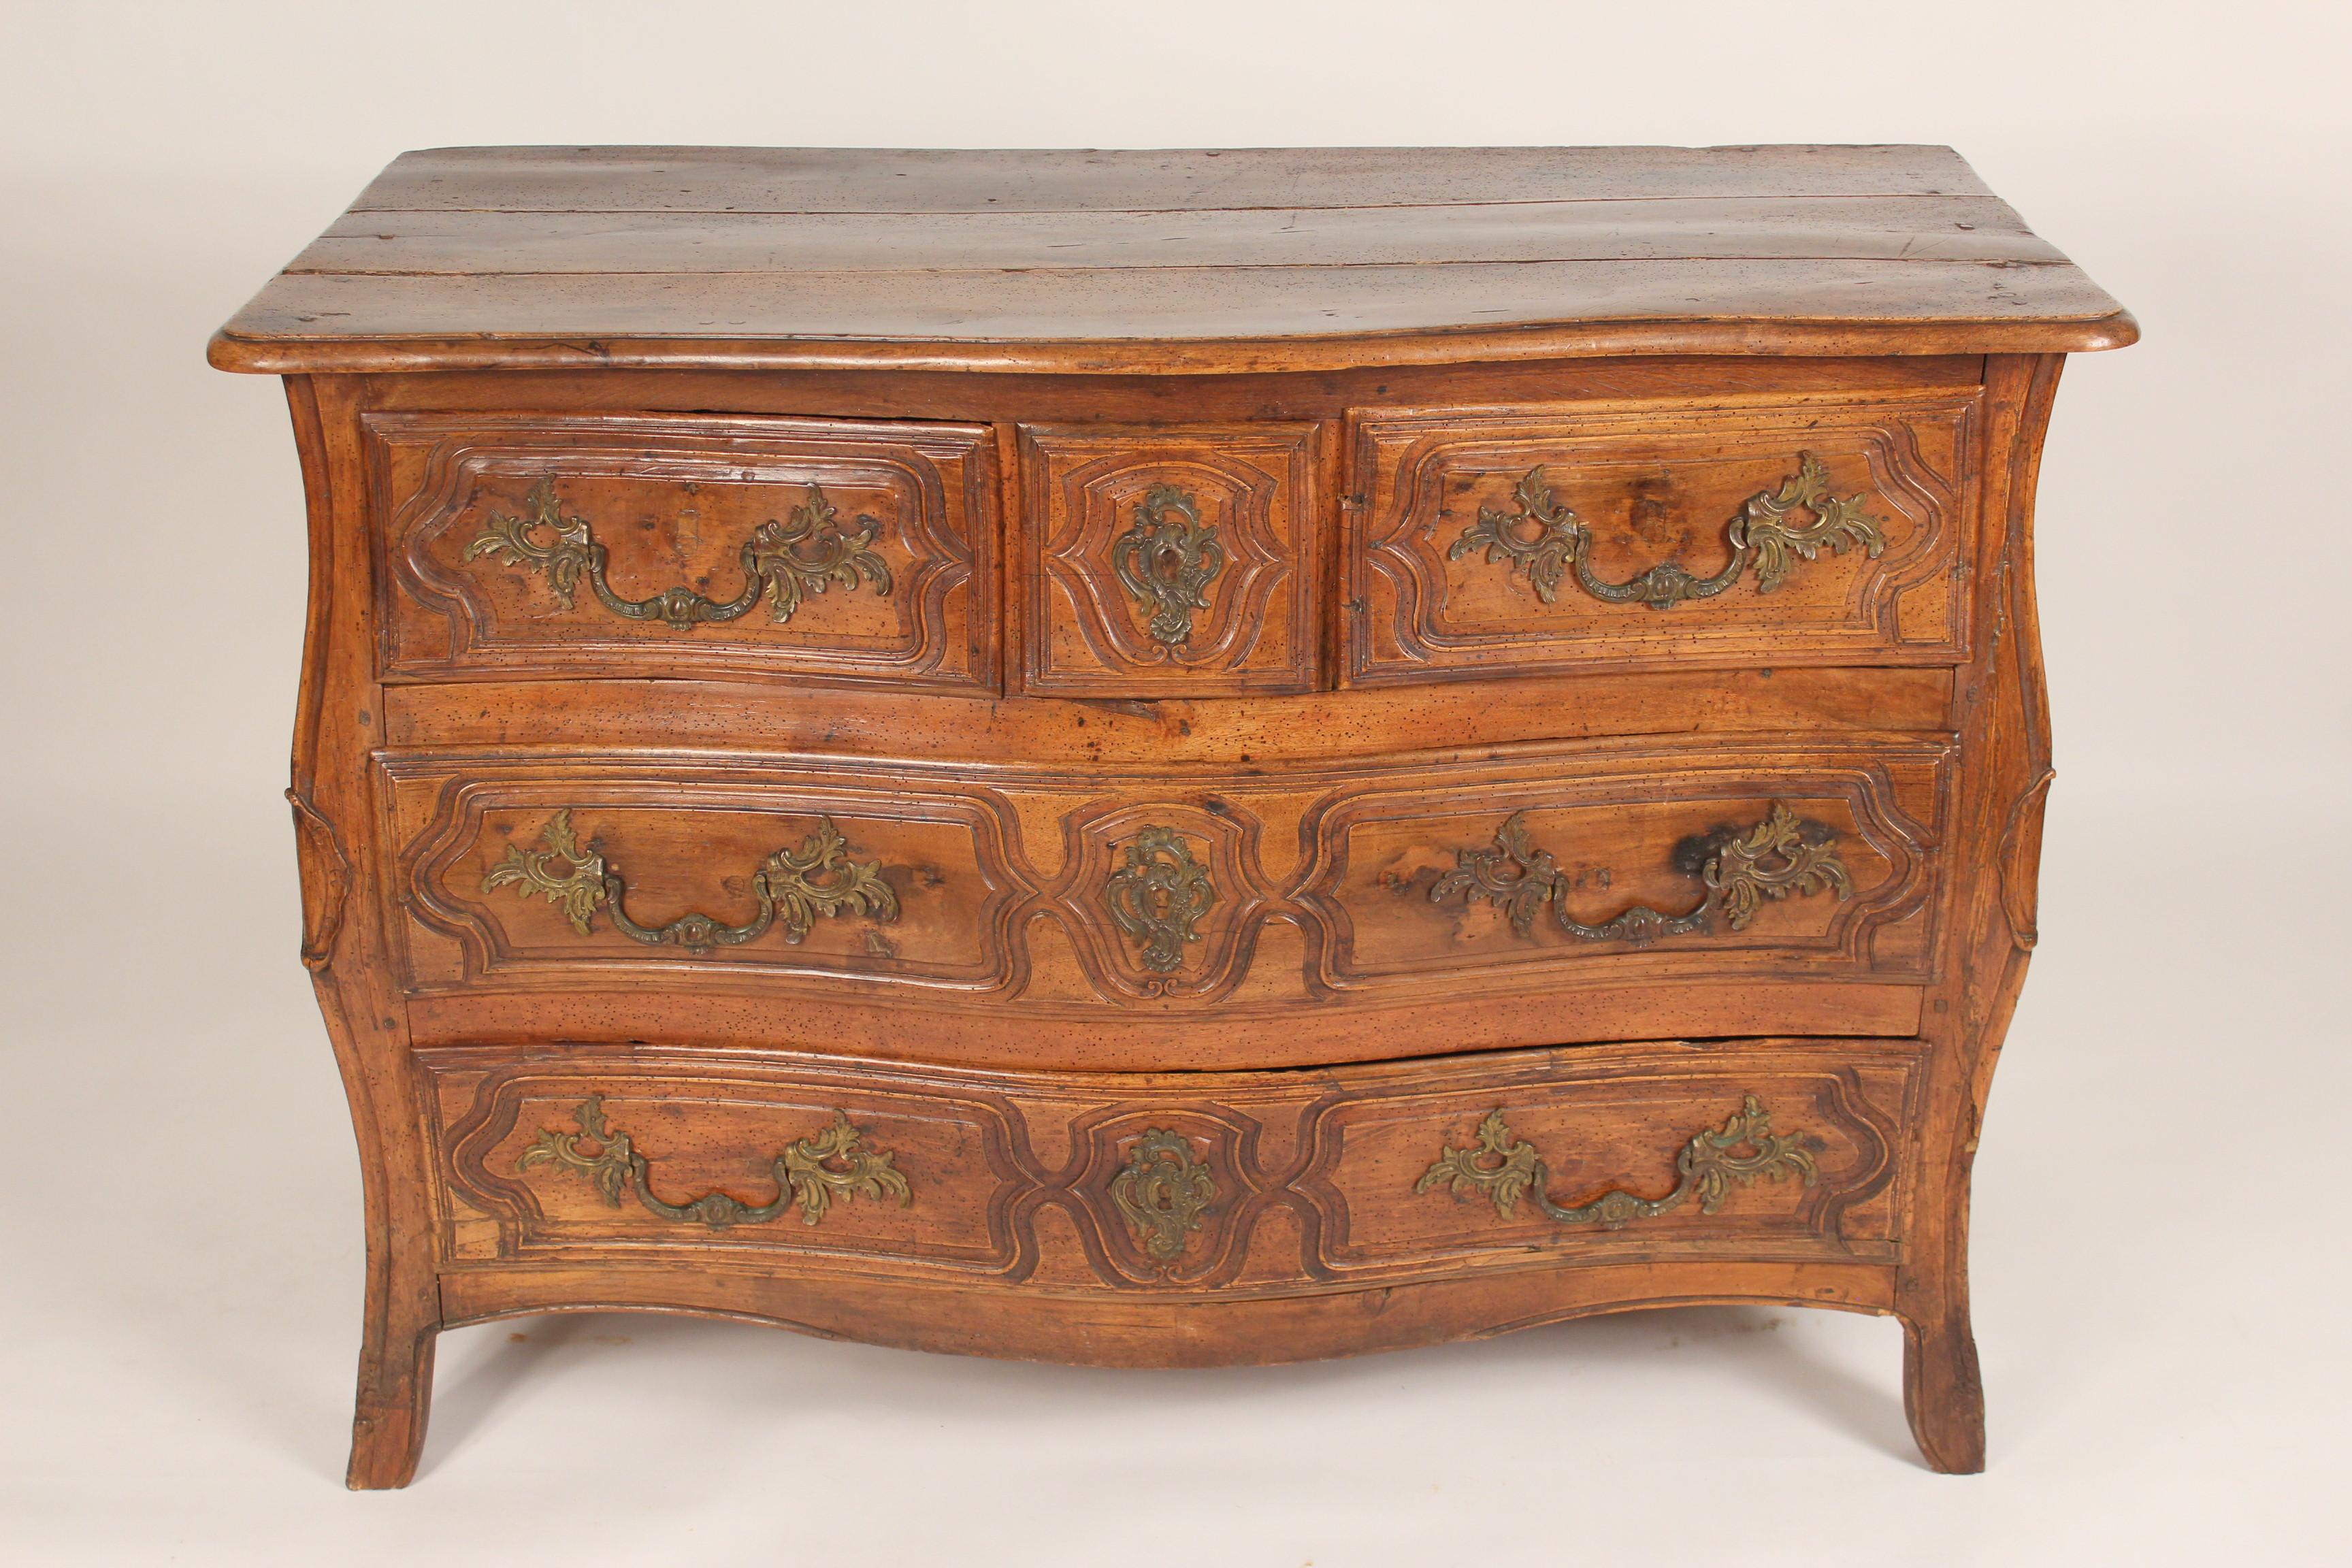 Antique Louis Provincial style walnut bombe commode, early 19th century. The walnut on this commode has a nice old patina.